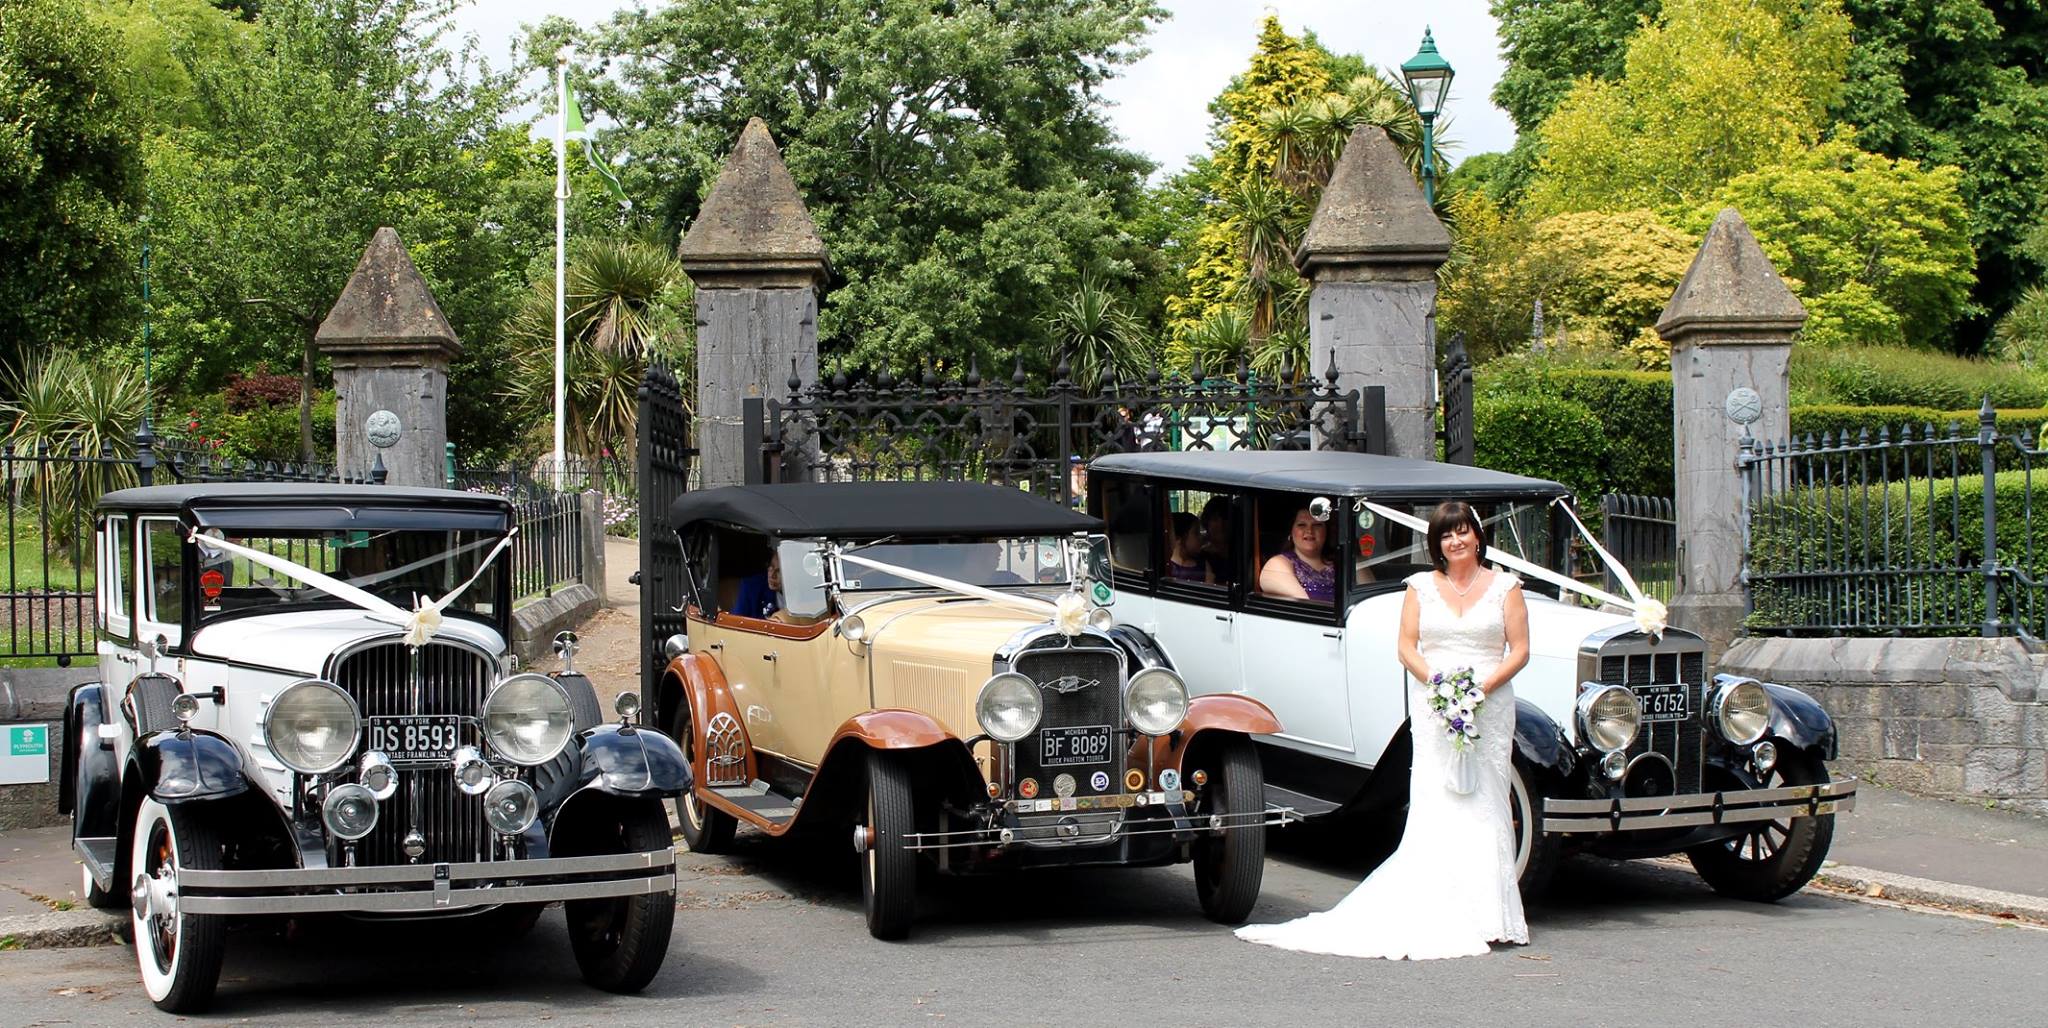 Selection of 3 Vintage cars with Bride wearing a white dress in front of the vehicles